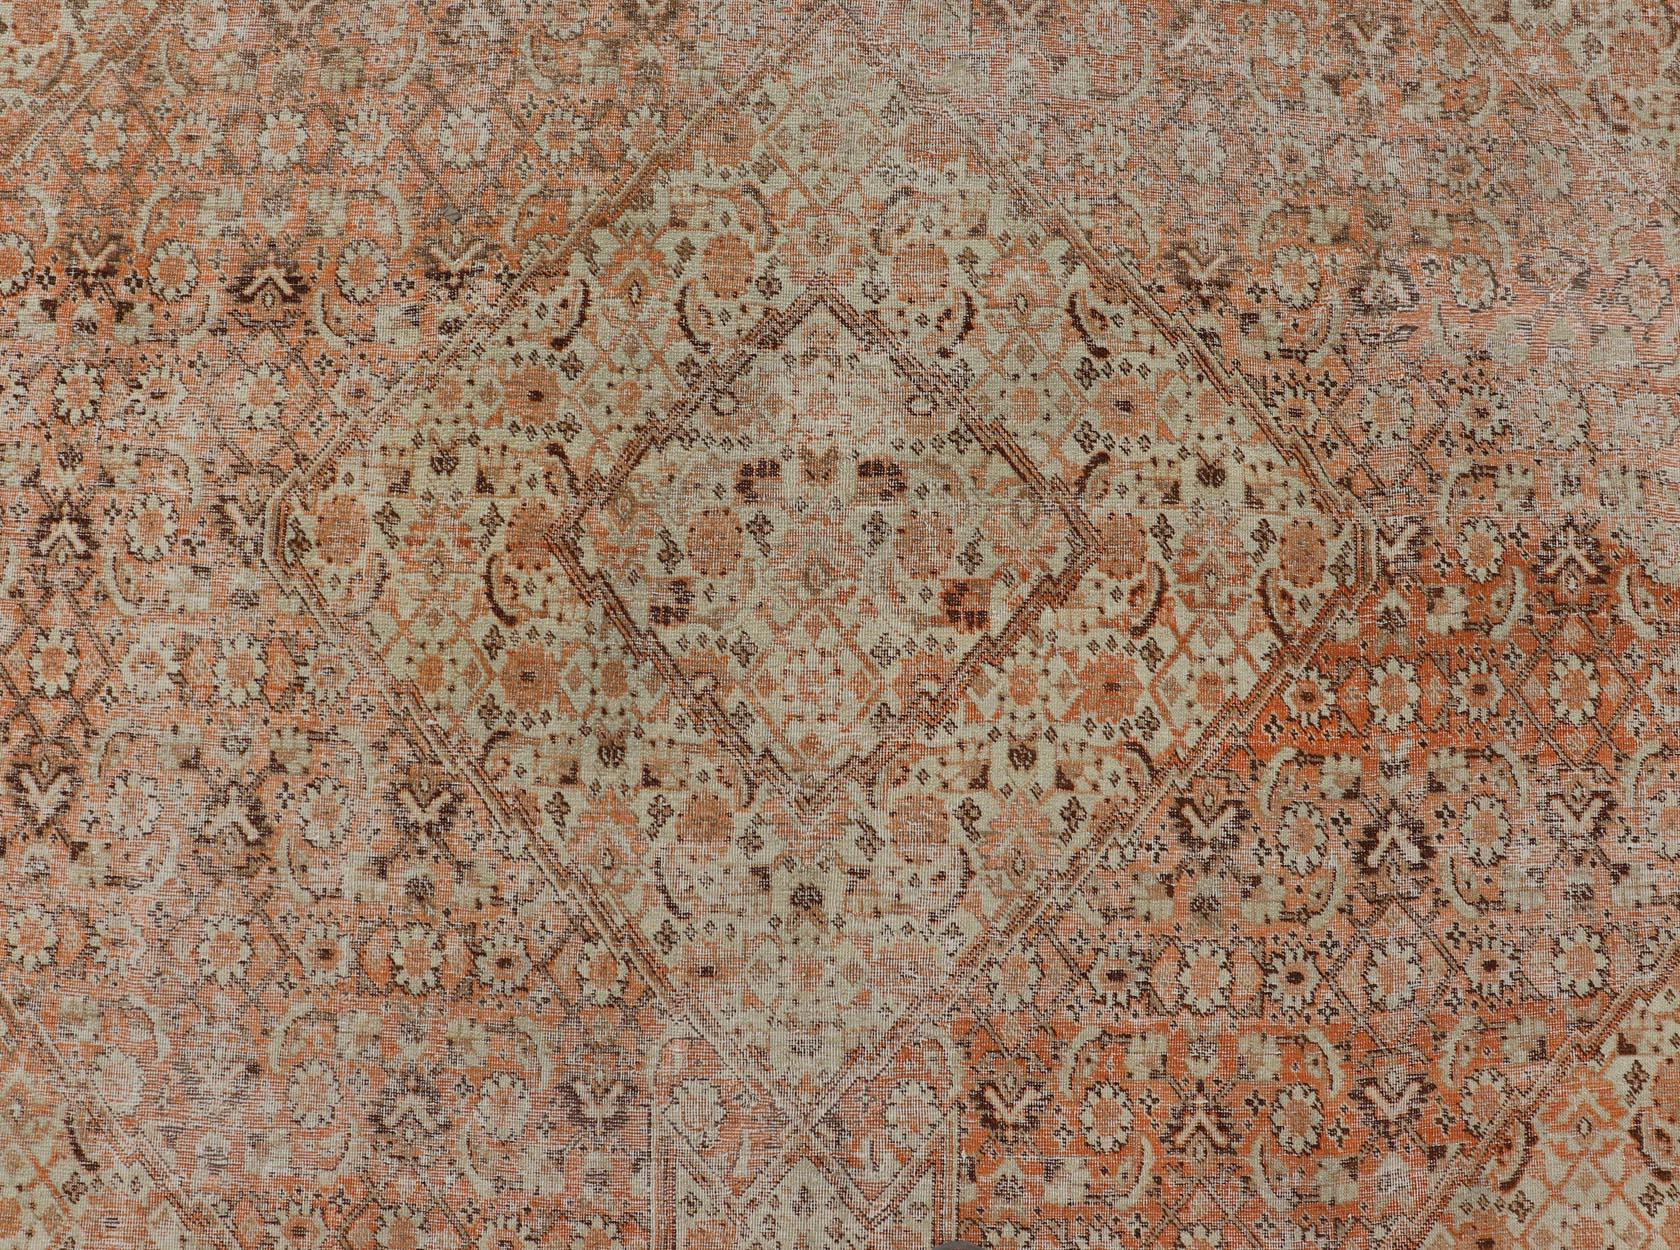 Antique Persian Tabriz with All-Over Medallion Design in Orange and Browns For Sale 1